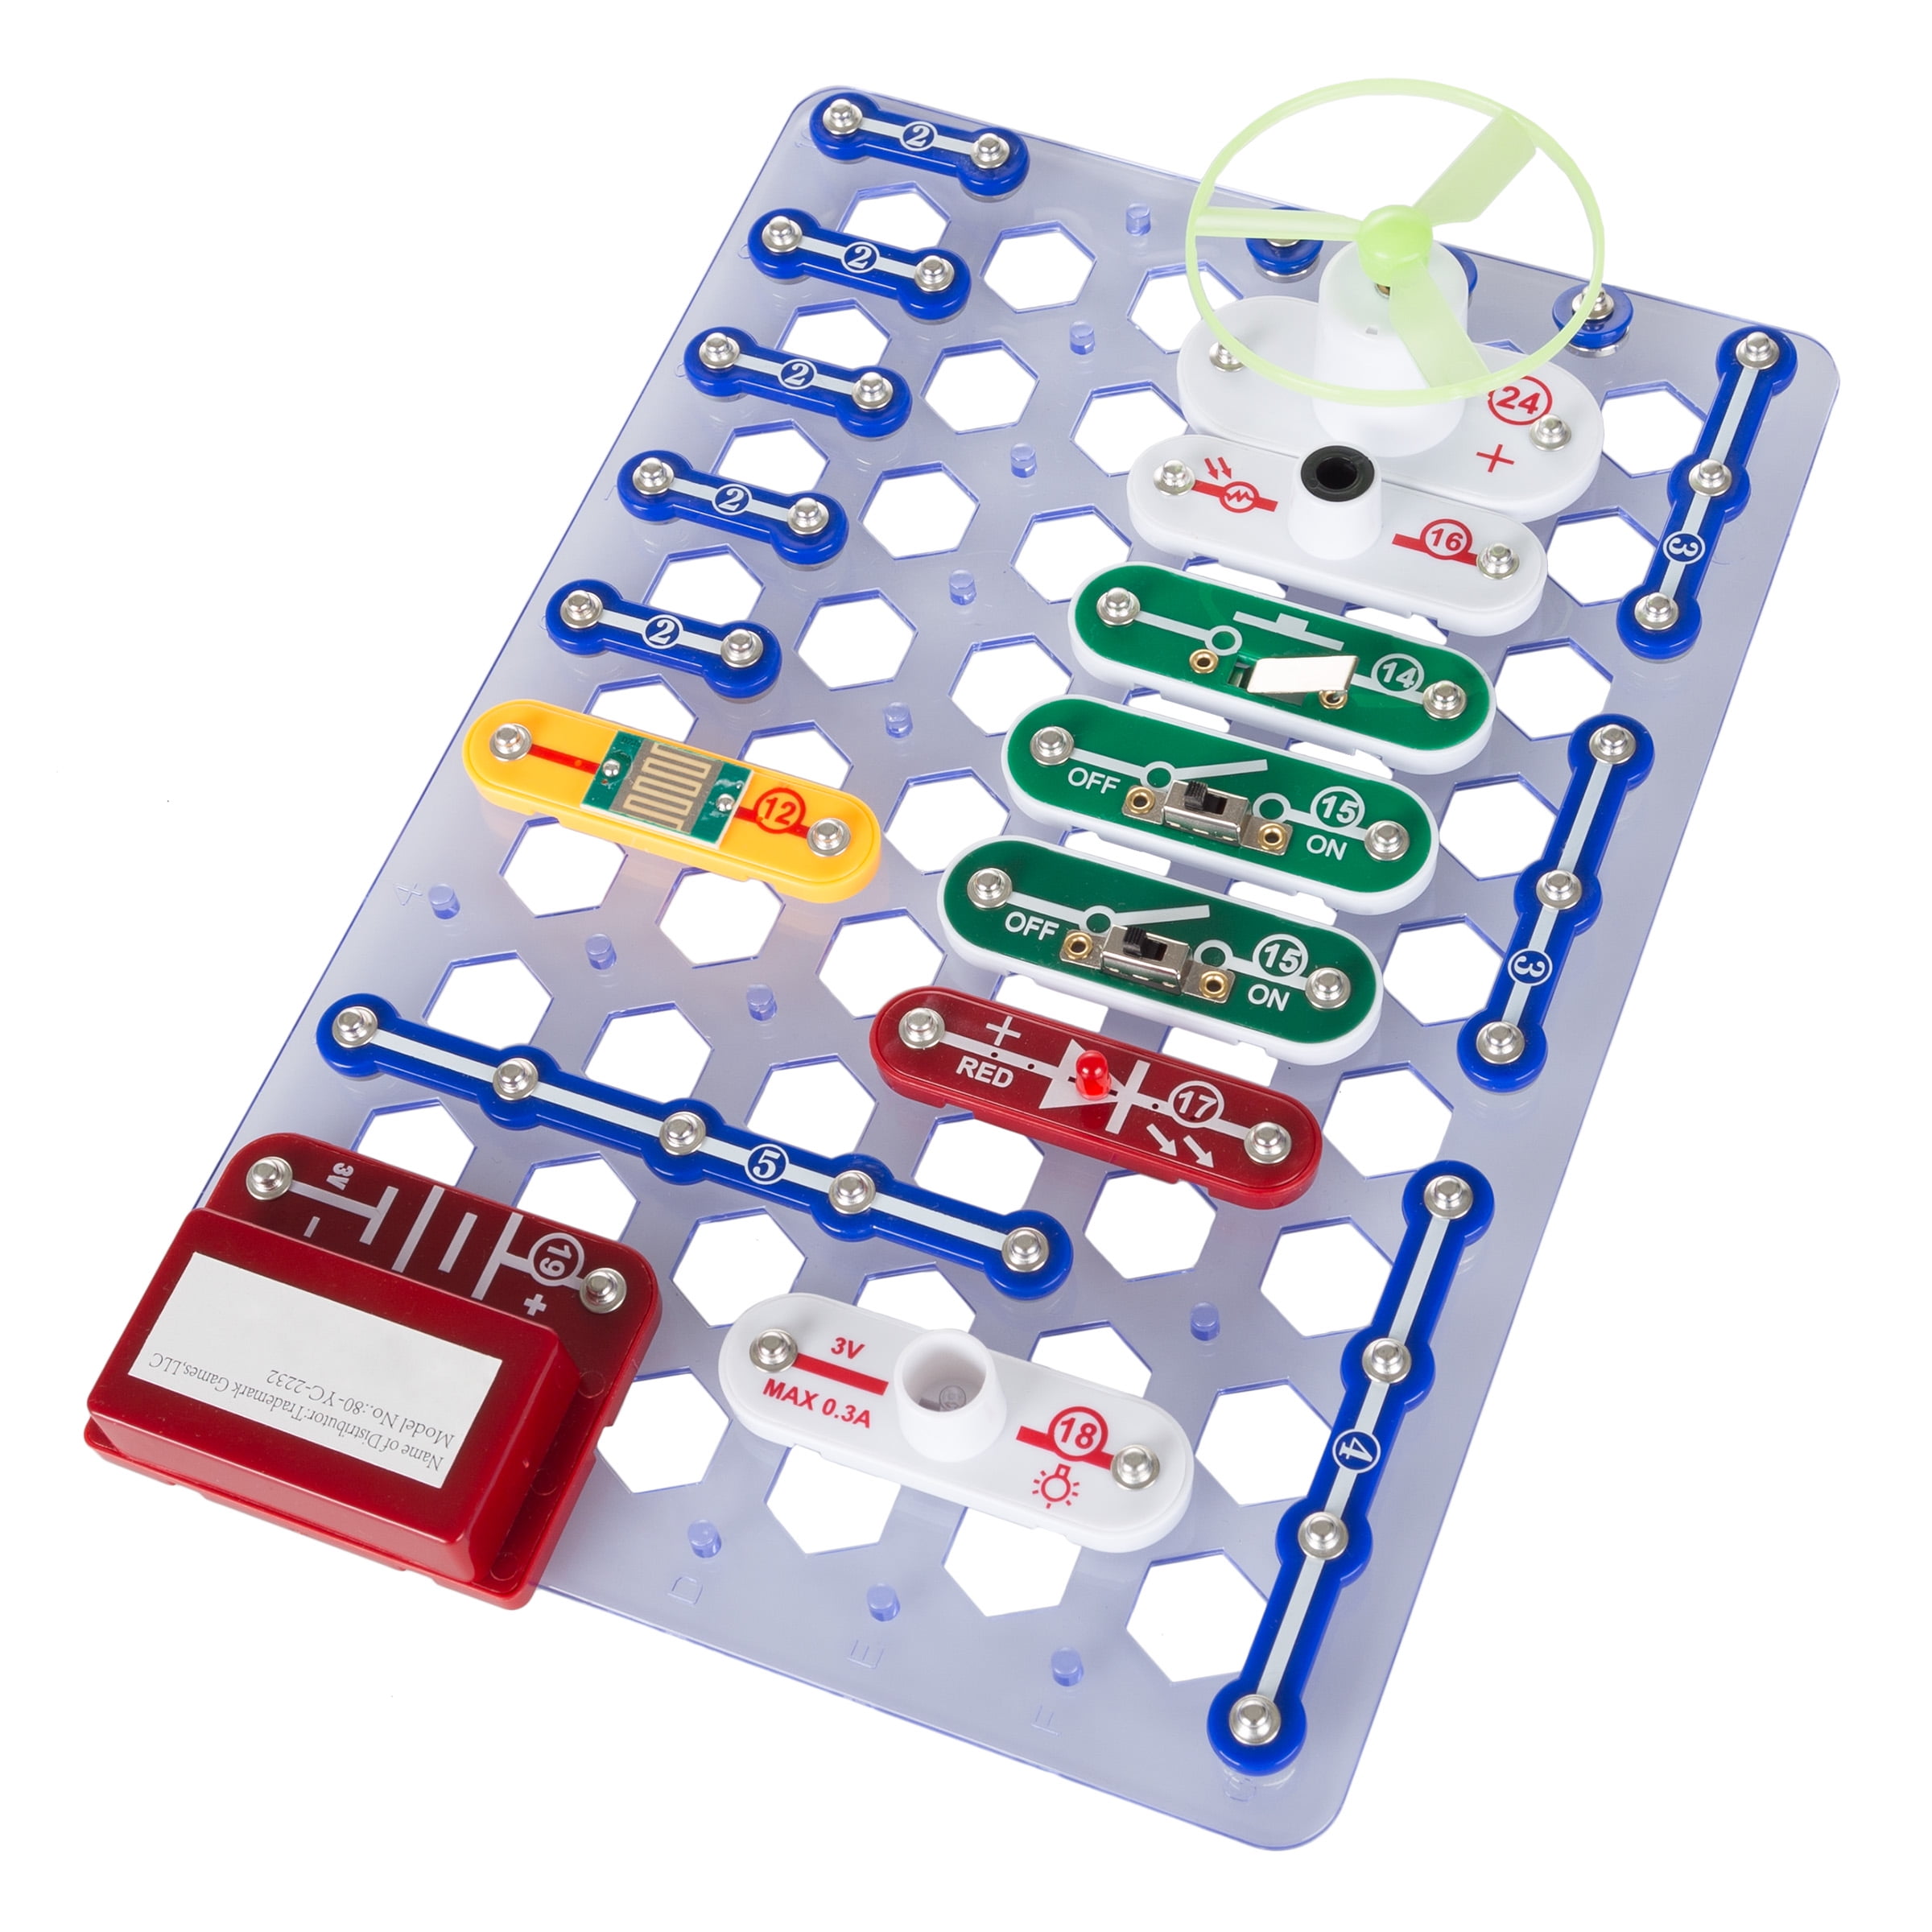 children's electrical circuits kit